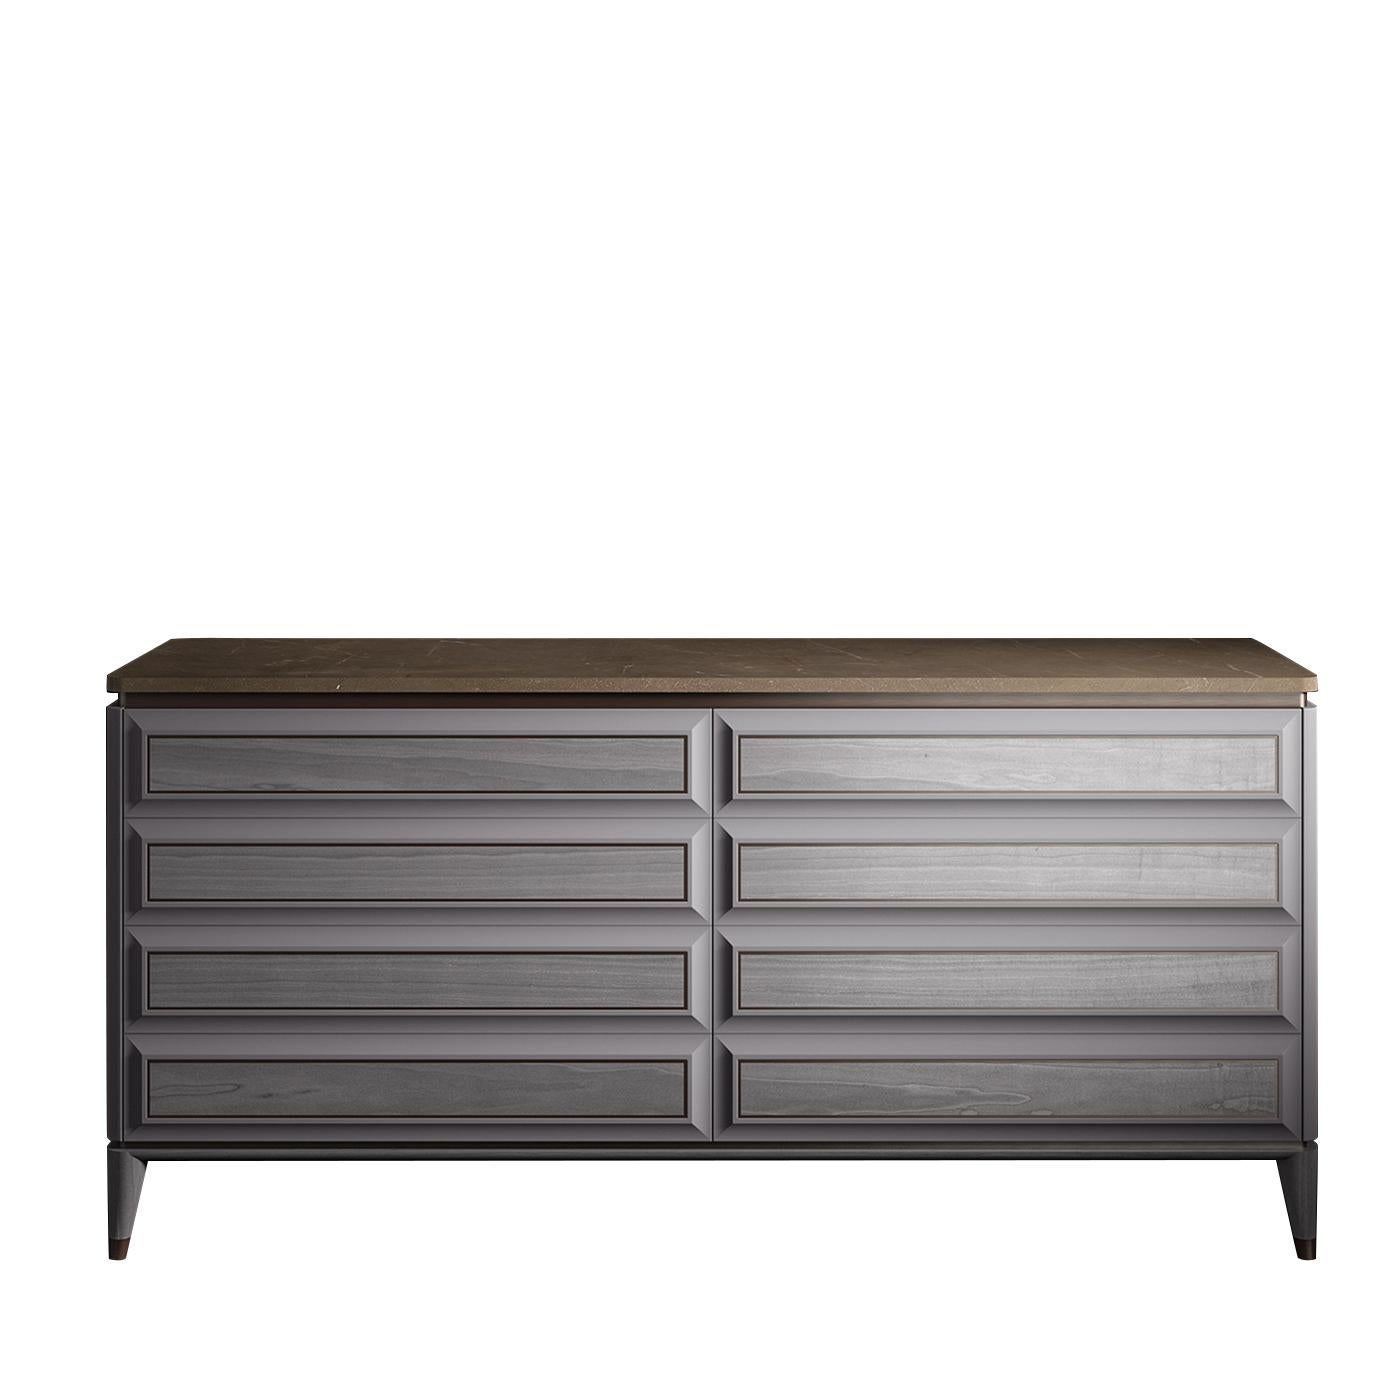 This striking, low-profile dresser is made of wood with a modern gray finish and features eight handle-less drawers with raised front panels that slide effortlessly on metal glides. The Minimalist frame is supported by four conical feet with